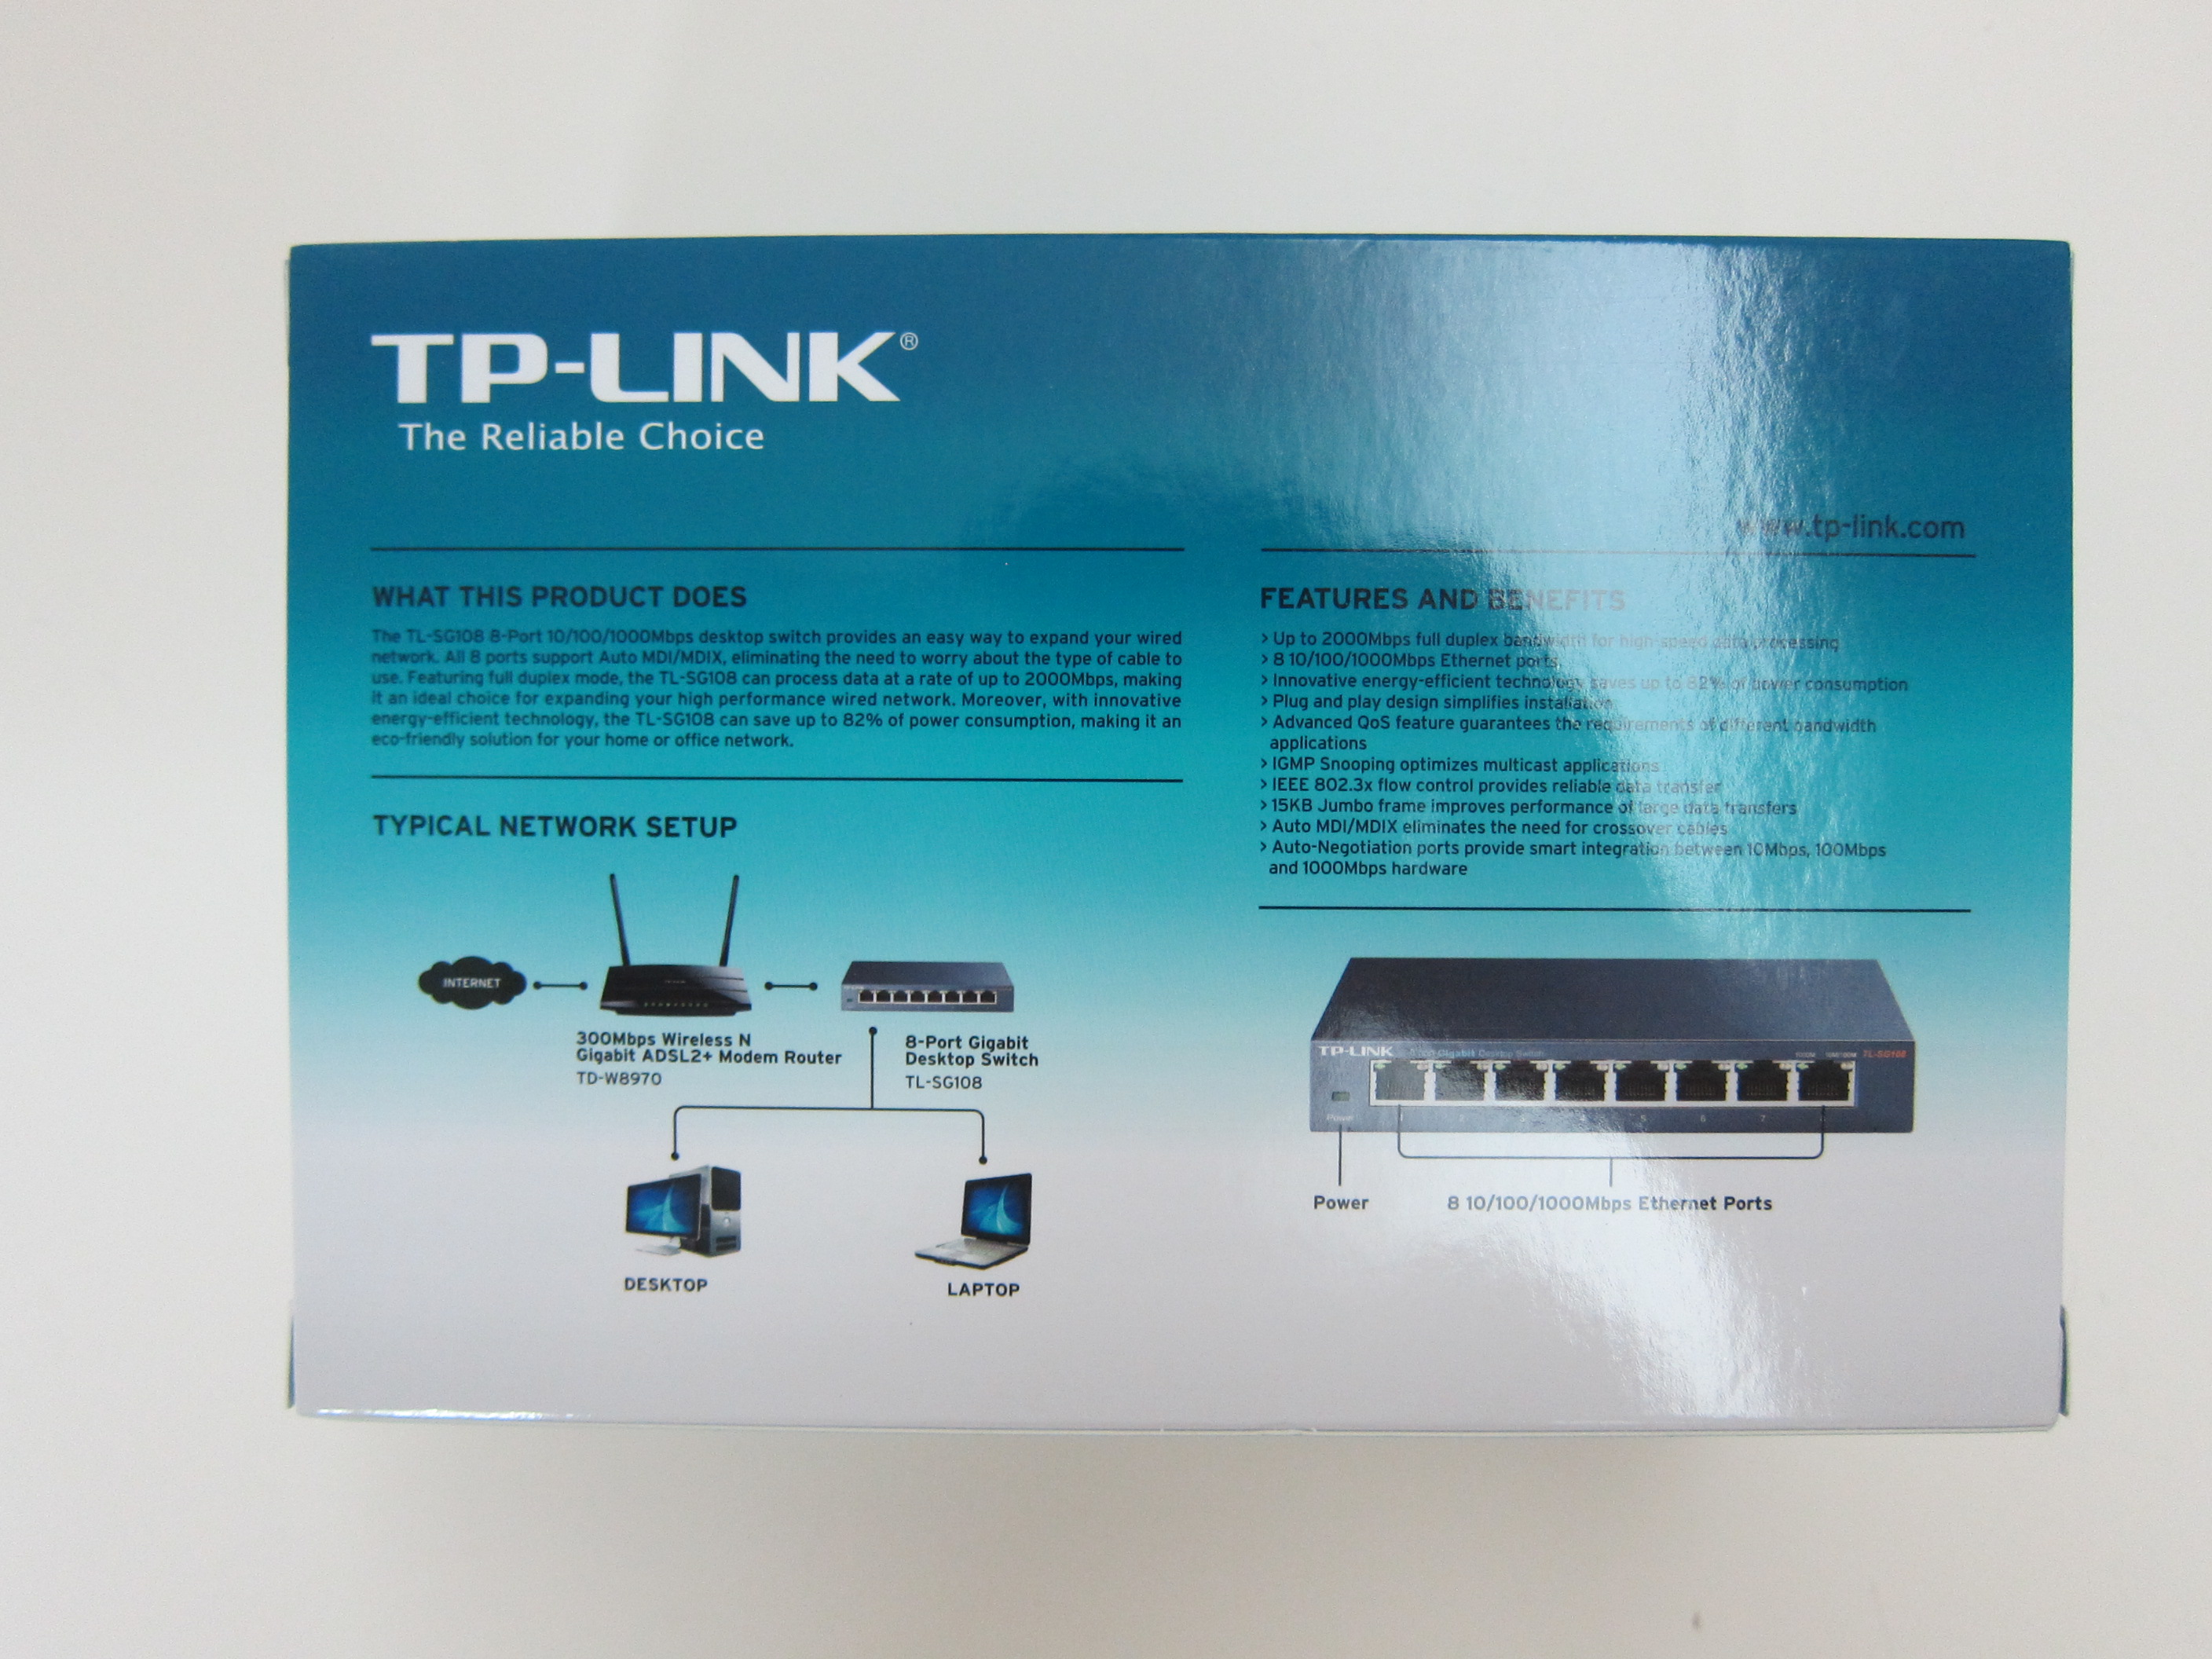 TP-LINK TL-SG108 8-Port Switch 10/100/1000Mbps Switch 